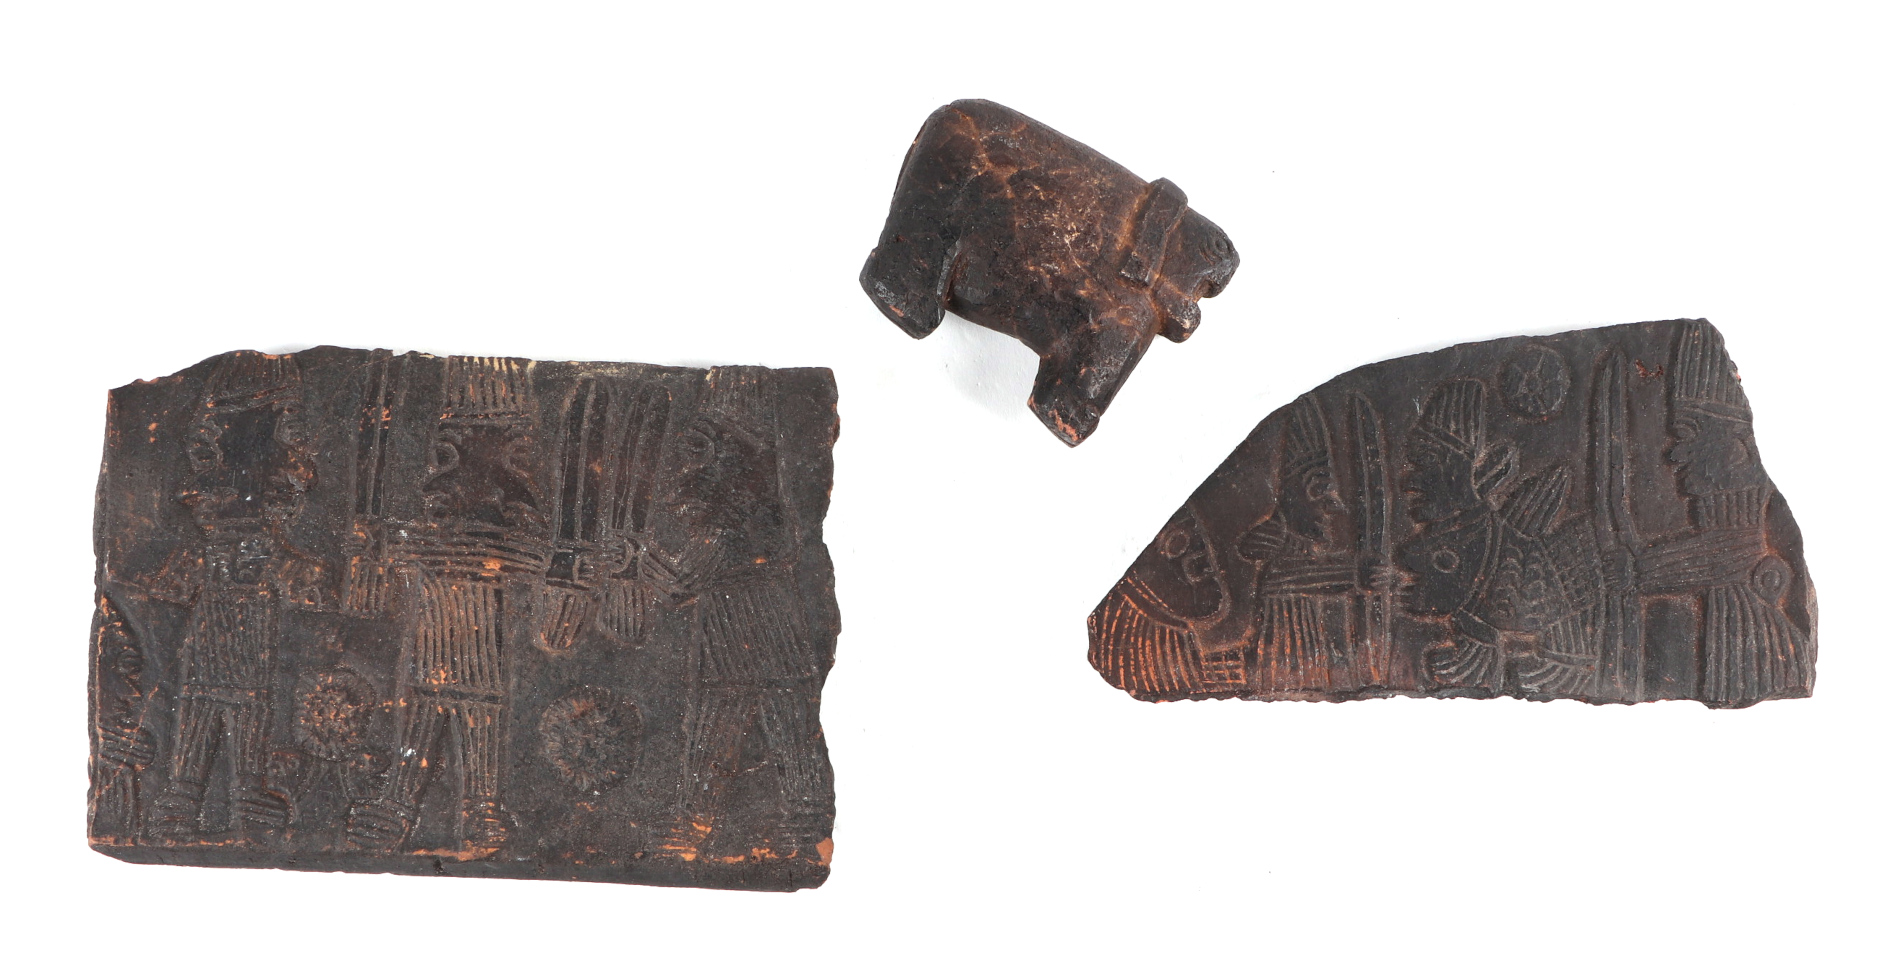 After the antique: two South American pottery tile fragments, with moulded decoration in the form of